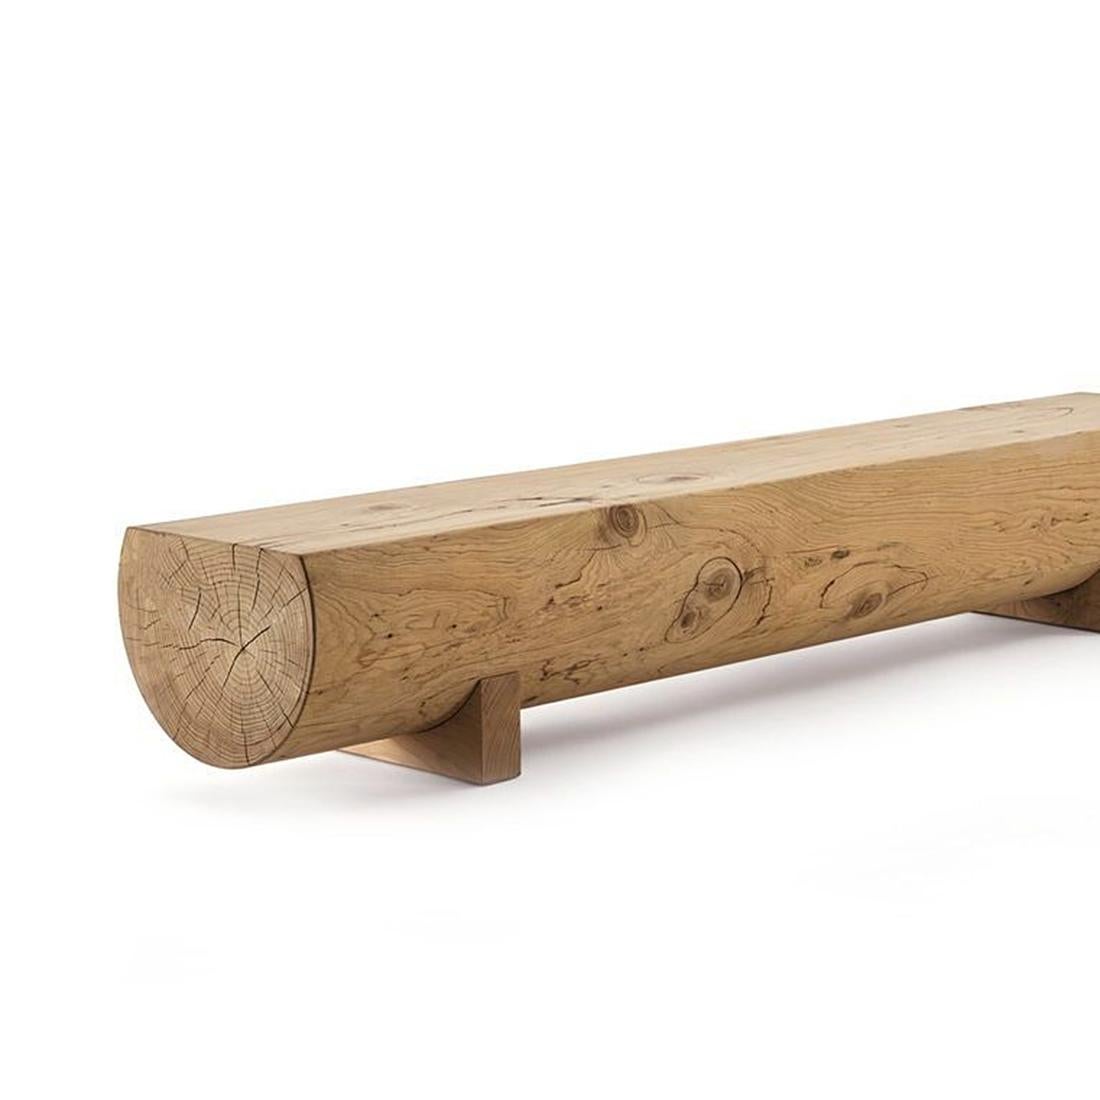 Bench Essential Cedar in natural cedar wood.
Made from a single block of cedar wood.
Natural and Minimalist design. With solid natural
aromatic cedar wood feet. Treated with natural
pine extracts wax.
available in:
L140xD46xH39,5cm, price: